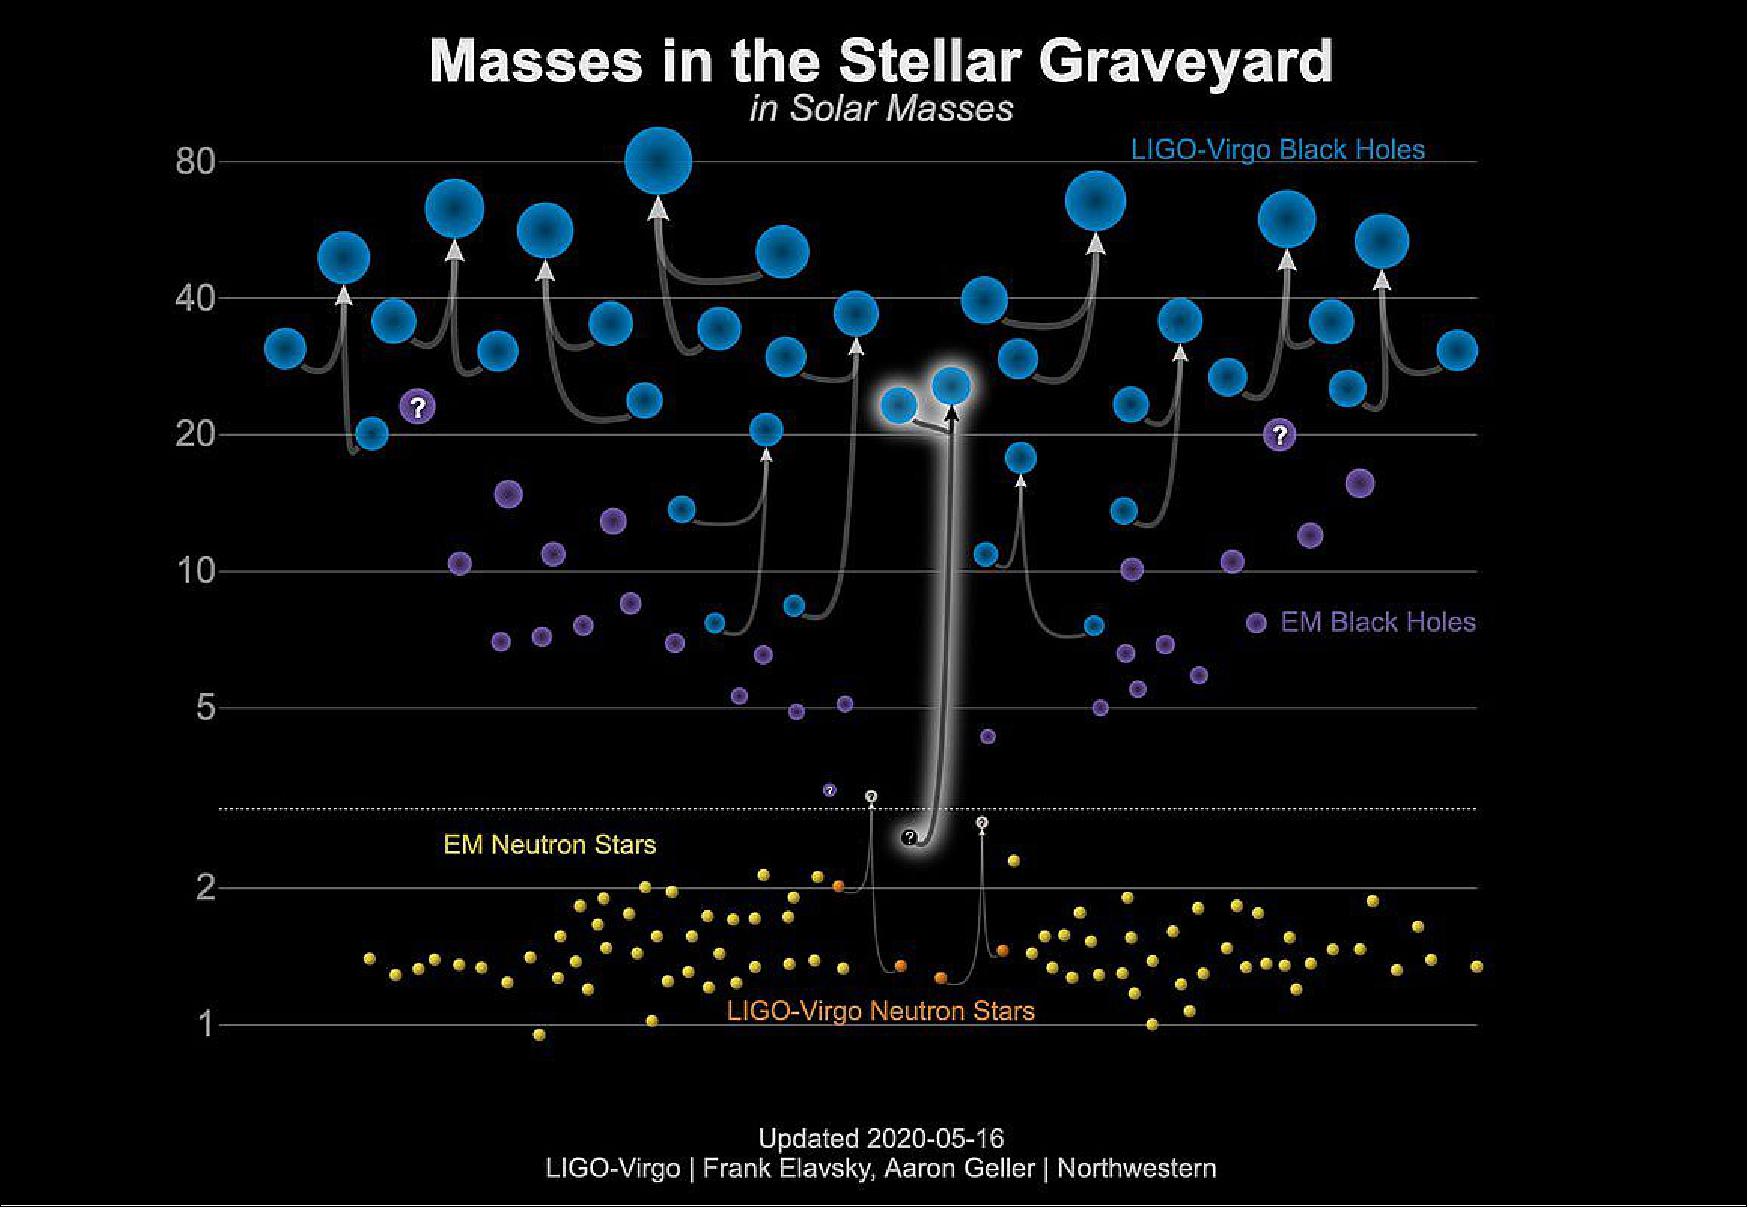 Figure 14: This graphic shows the masses for black holes detected through electromagnetic observations (purple), the black holes measured by gravitational-wave observations (blue), the neutron stars measured with electromagnetic observations (yellow), and the neutron stars detected through gravitational waves (orange). GW190814 is highlighted in the middle of the graphic as the merger of a black hole and a mystery object around 2.6 times the mass of the sun (image credit: LIGO-Virgo/ Frank Elavsky & Aaron Geller (Northwestern))